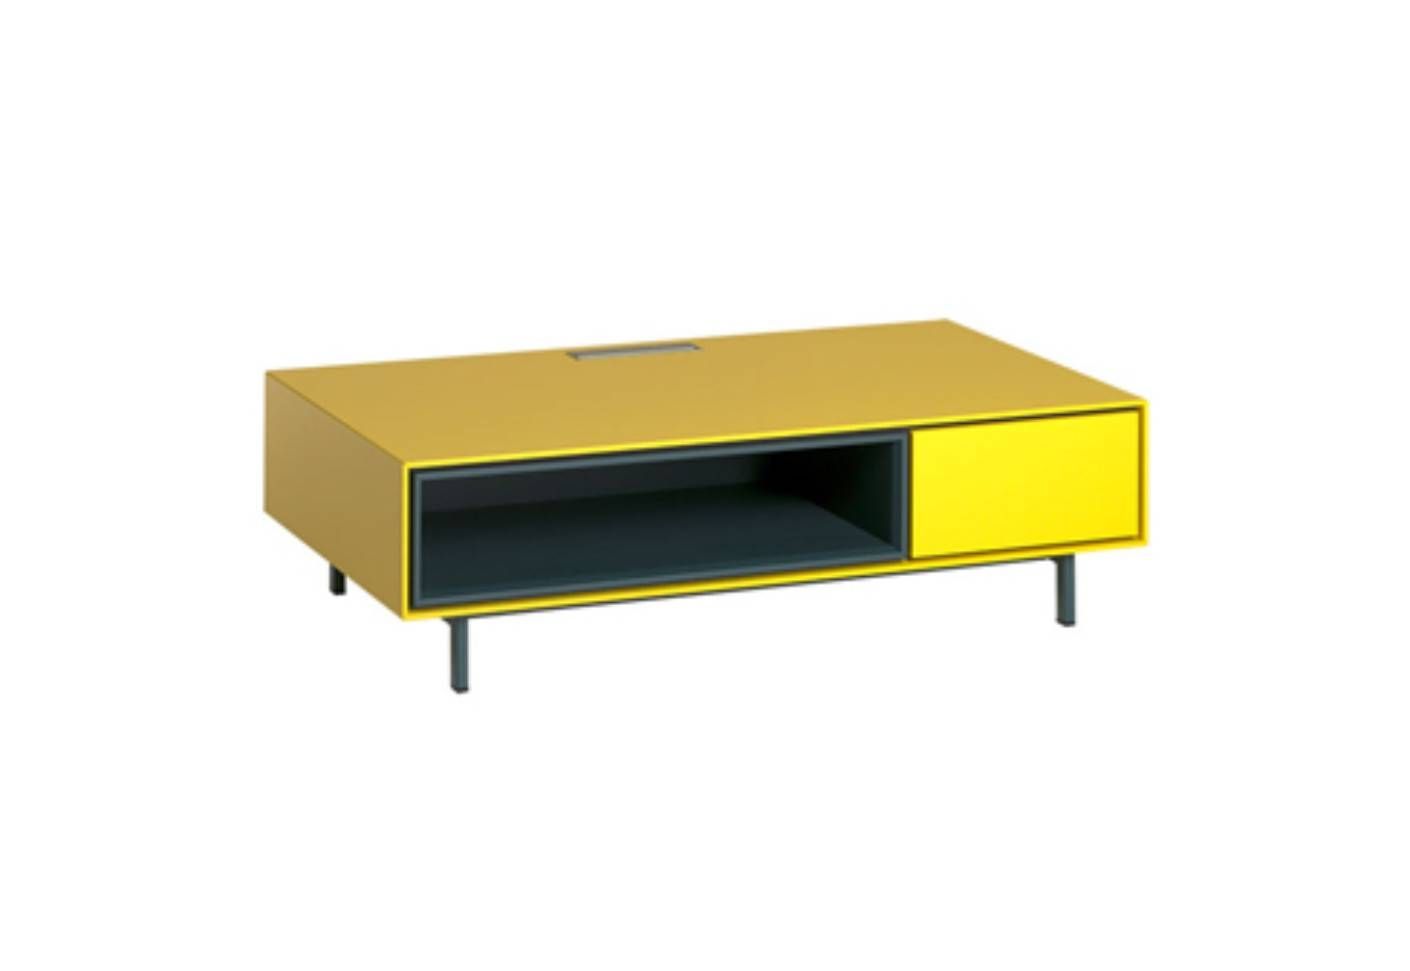 Act Tv Sideboardteamwellis | Stylepark With Regard To Tv Sideboard (View 11 of 20)